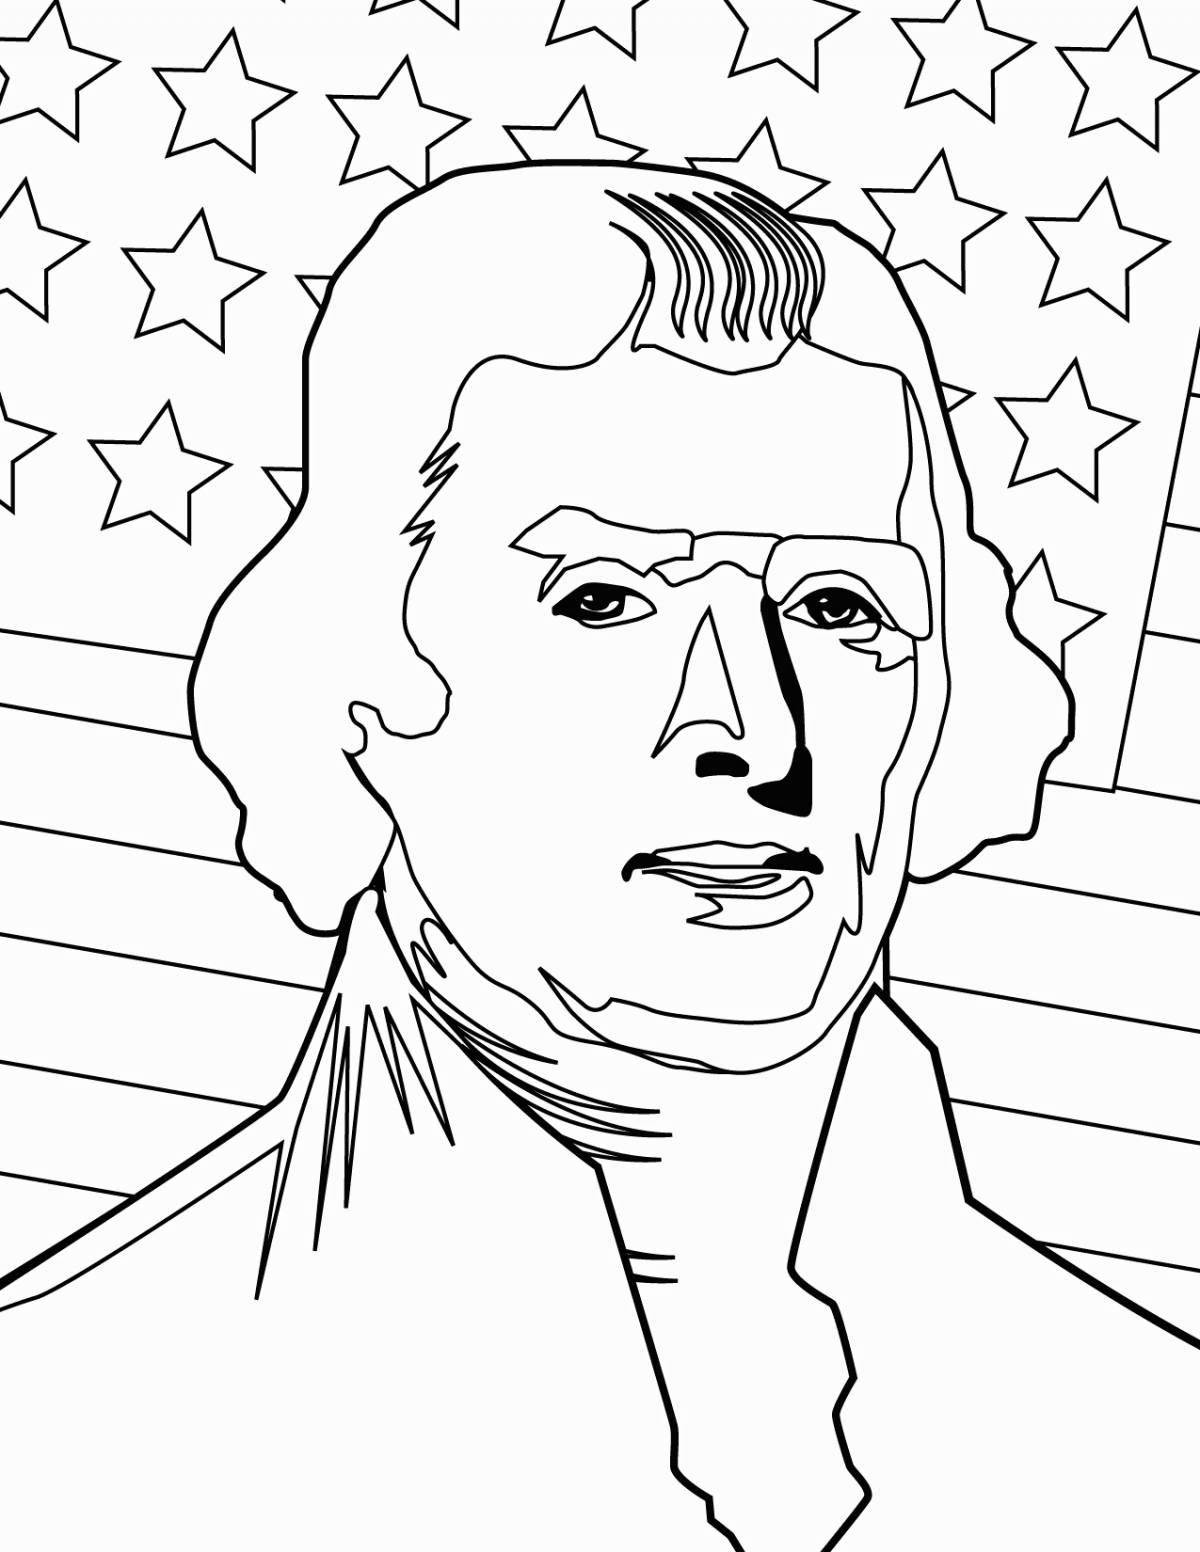 The president's dazzling coloring page